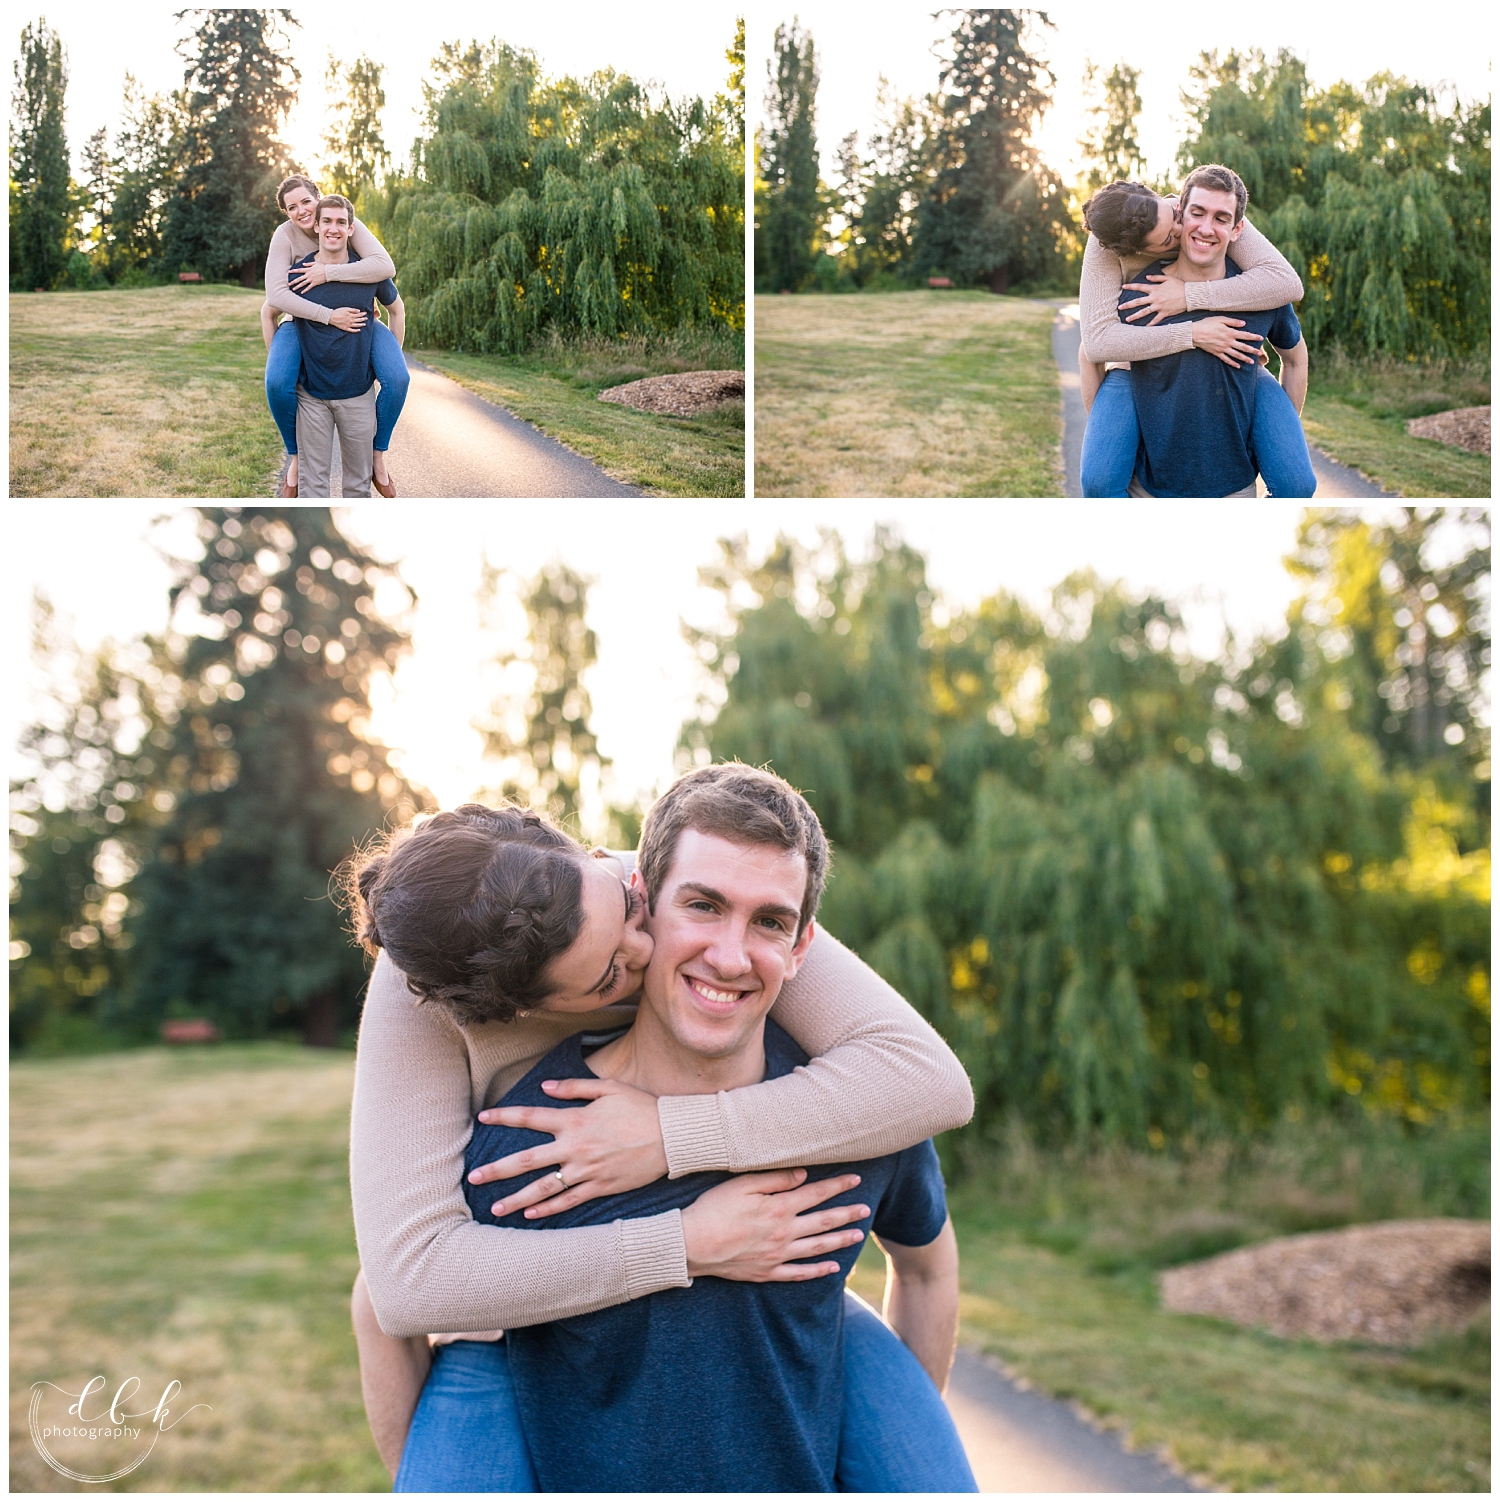 guy giving his fiance a piggyback ride for engagement pictures at Juanita Bay Park